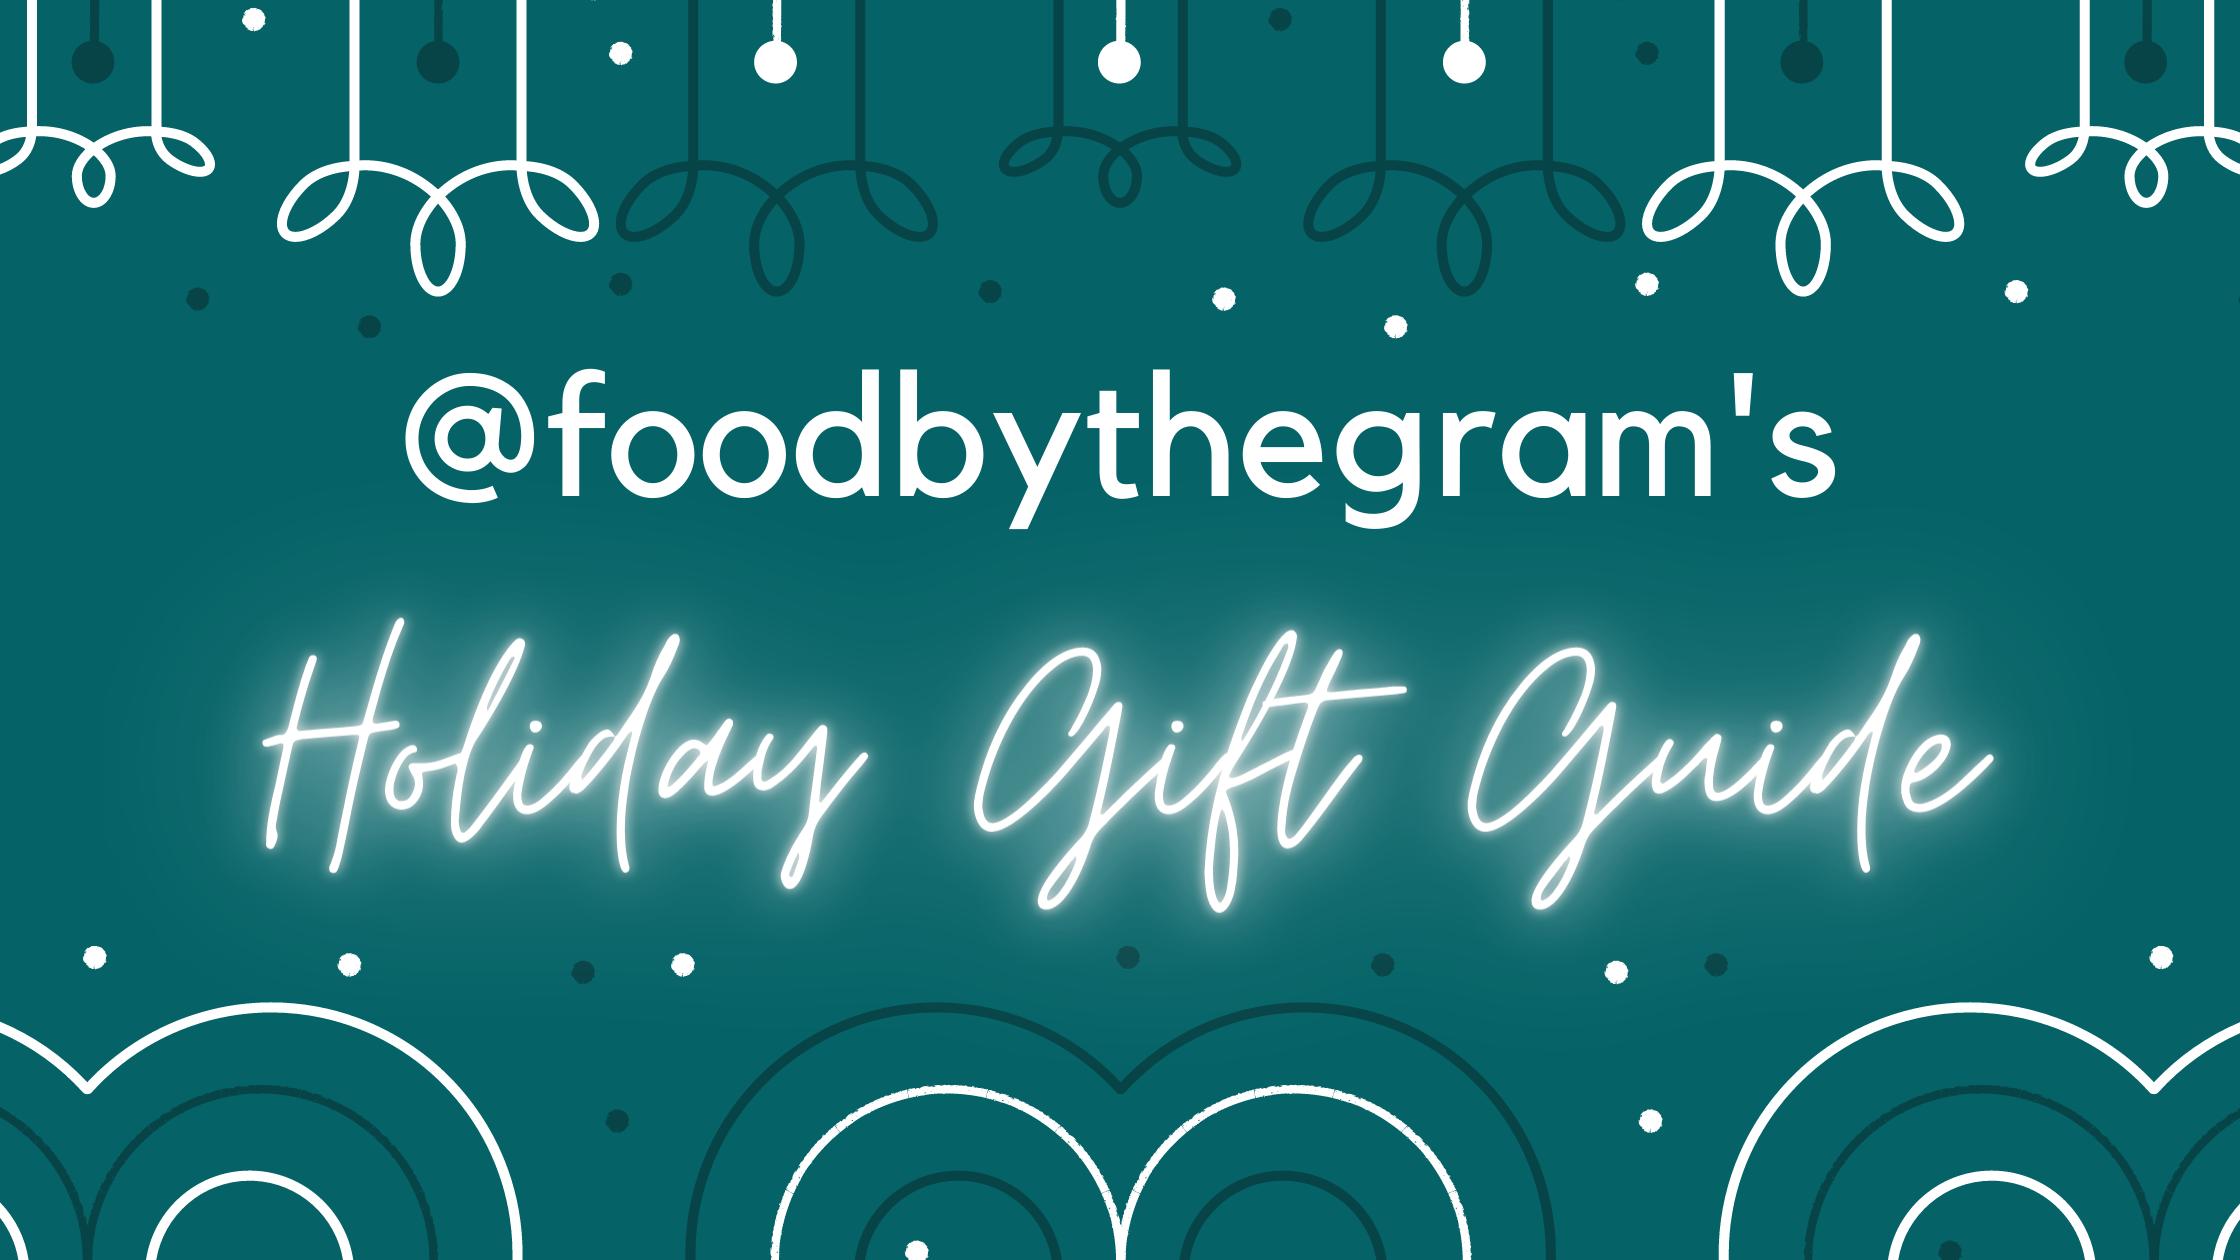 @foodbythegram's Holiday Gift Guide!